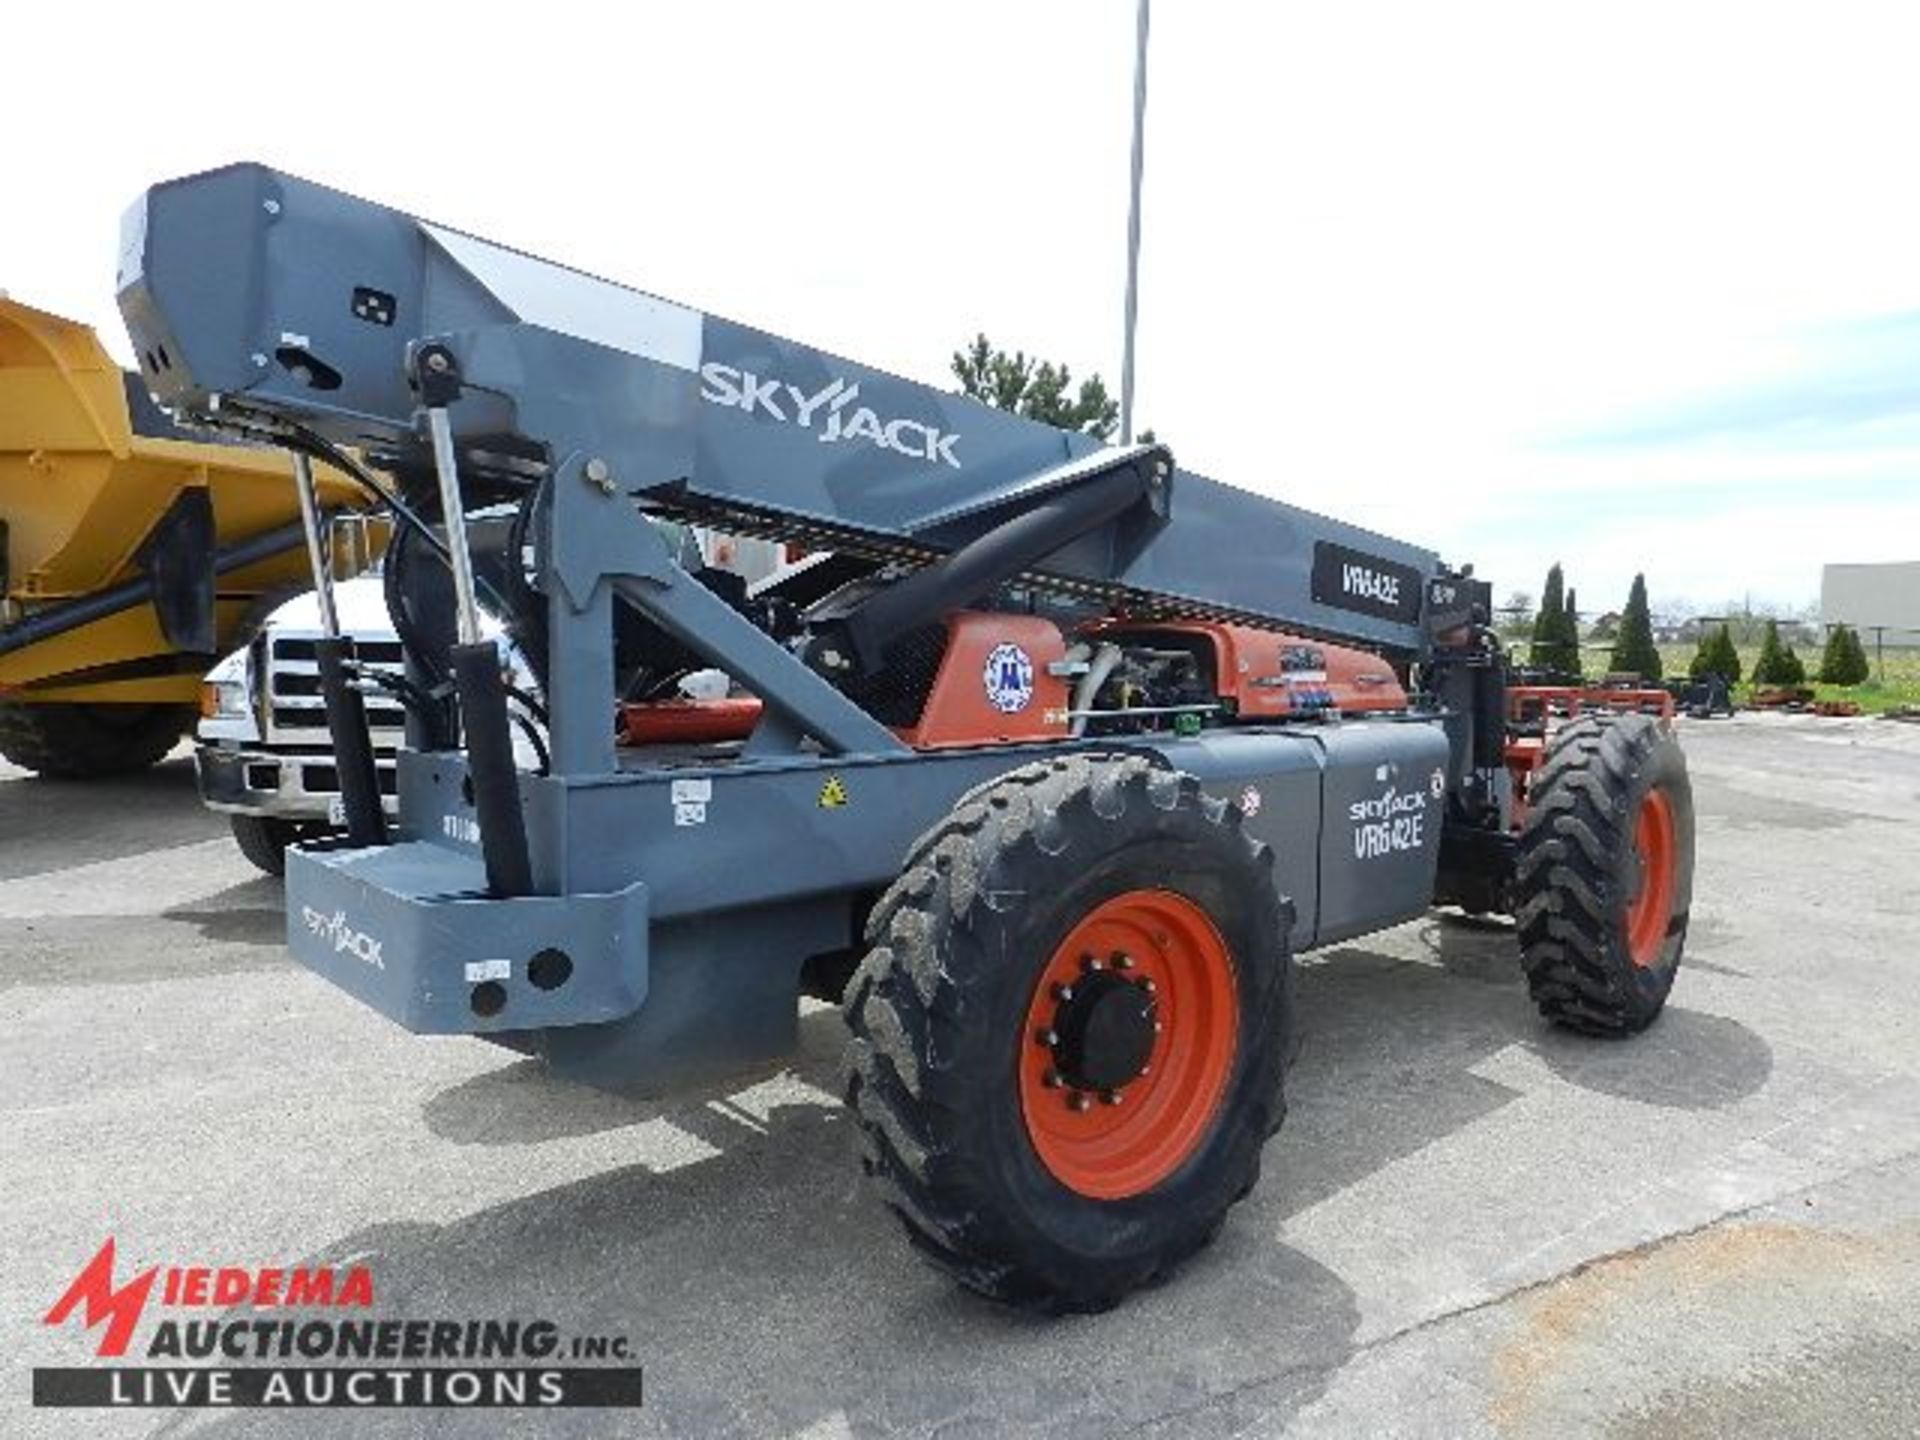 2014 SKYJACK VR-642E EXTENDED BOOM OFF TERRAIN FORKLIFT, 485 HOURS SHOWING, 6000 LB CAPACITY, 42' - Image 3 of 12